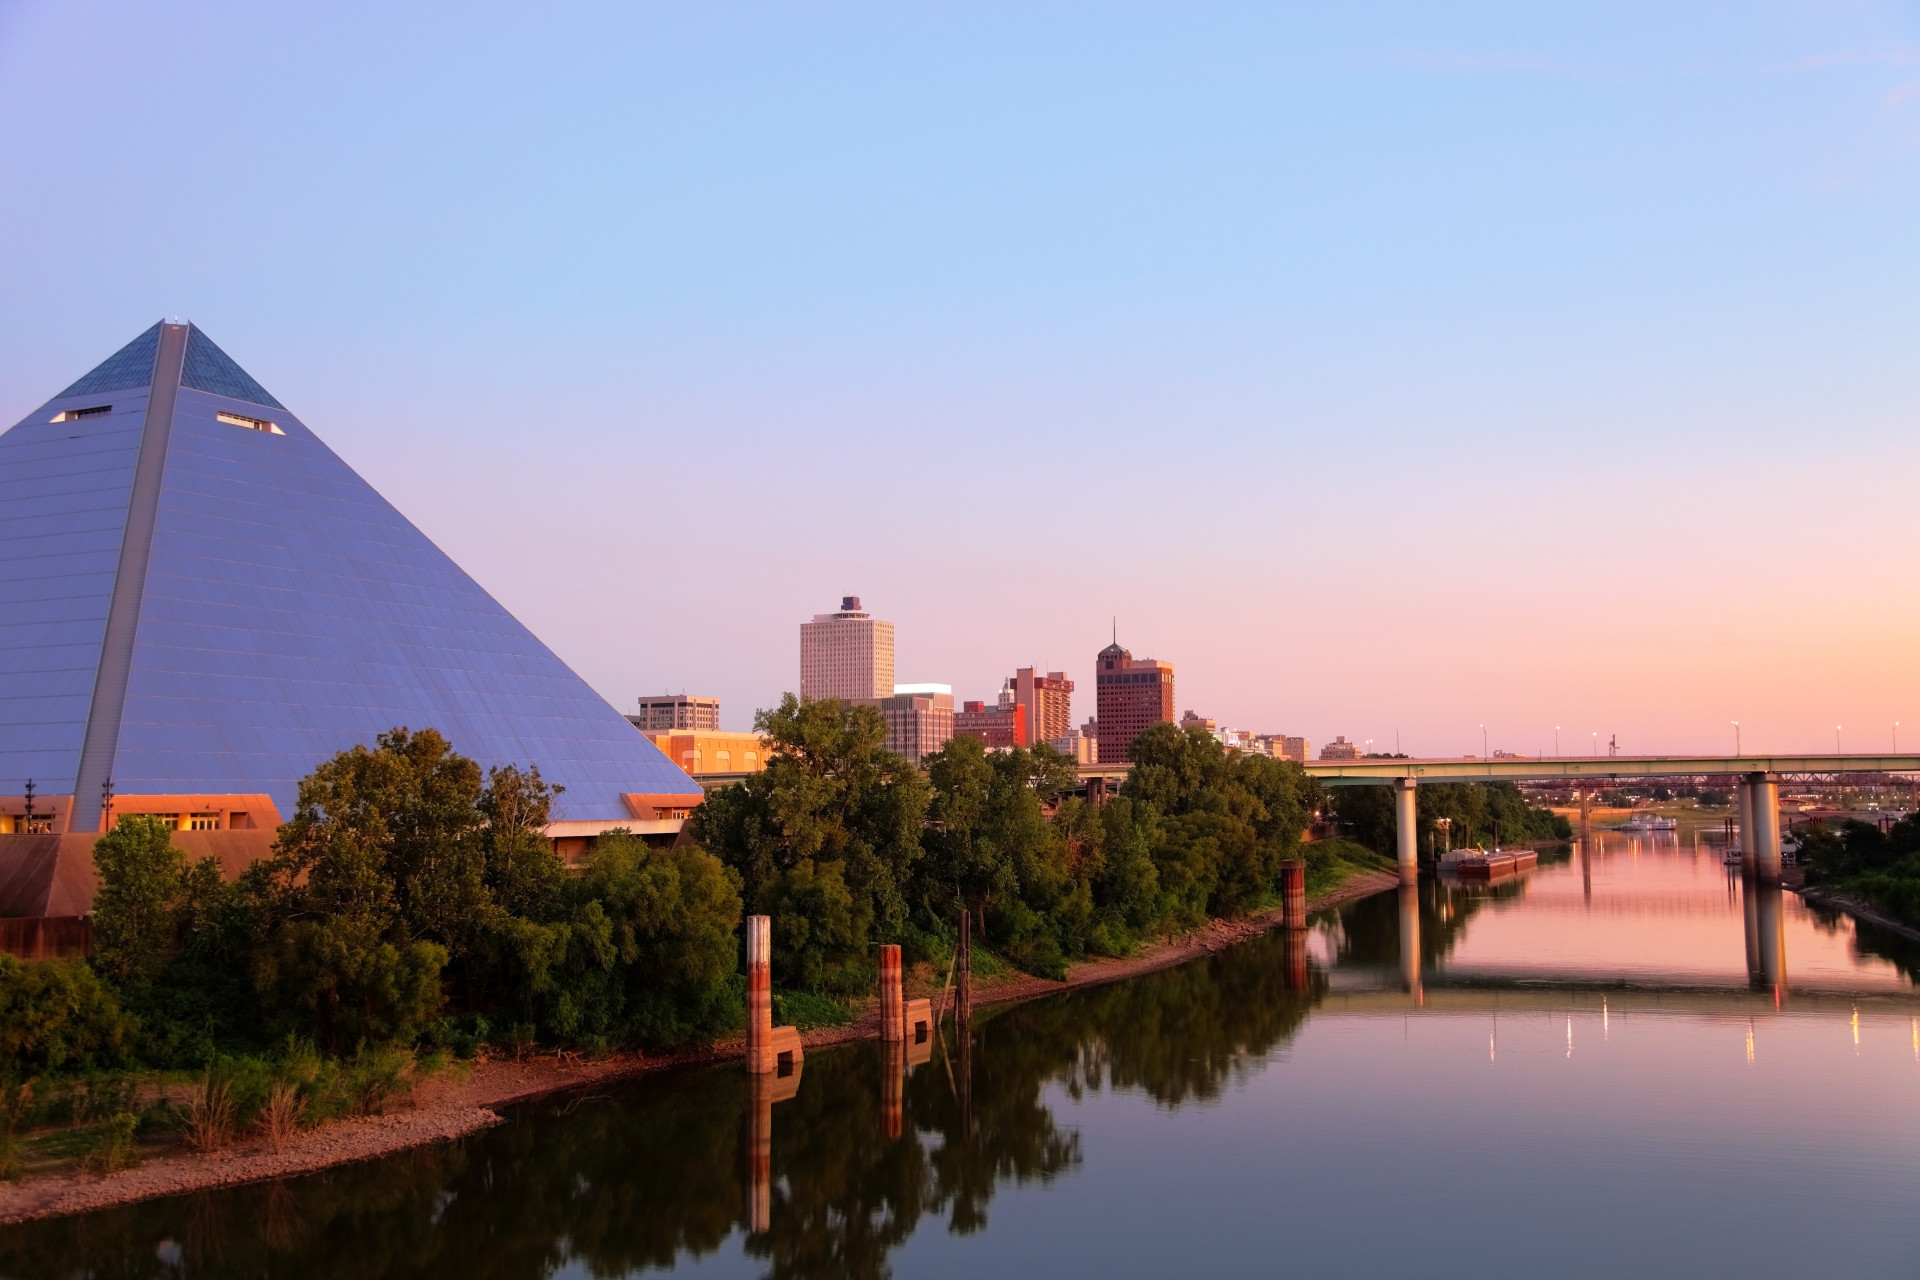 Memphis with Bass Pro Pyramid